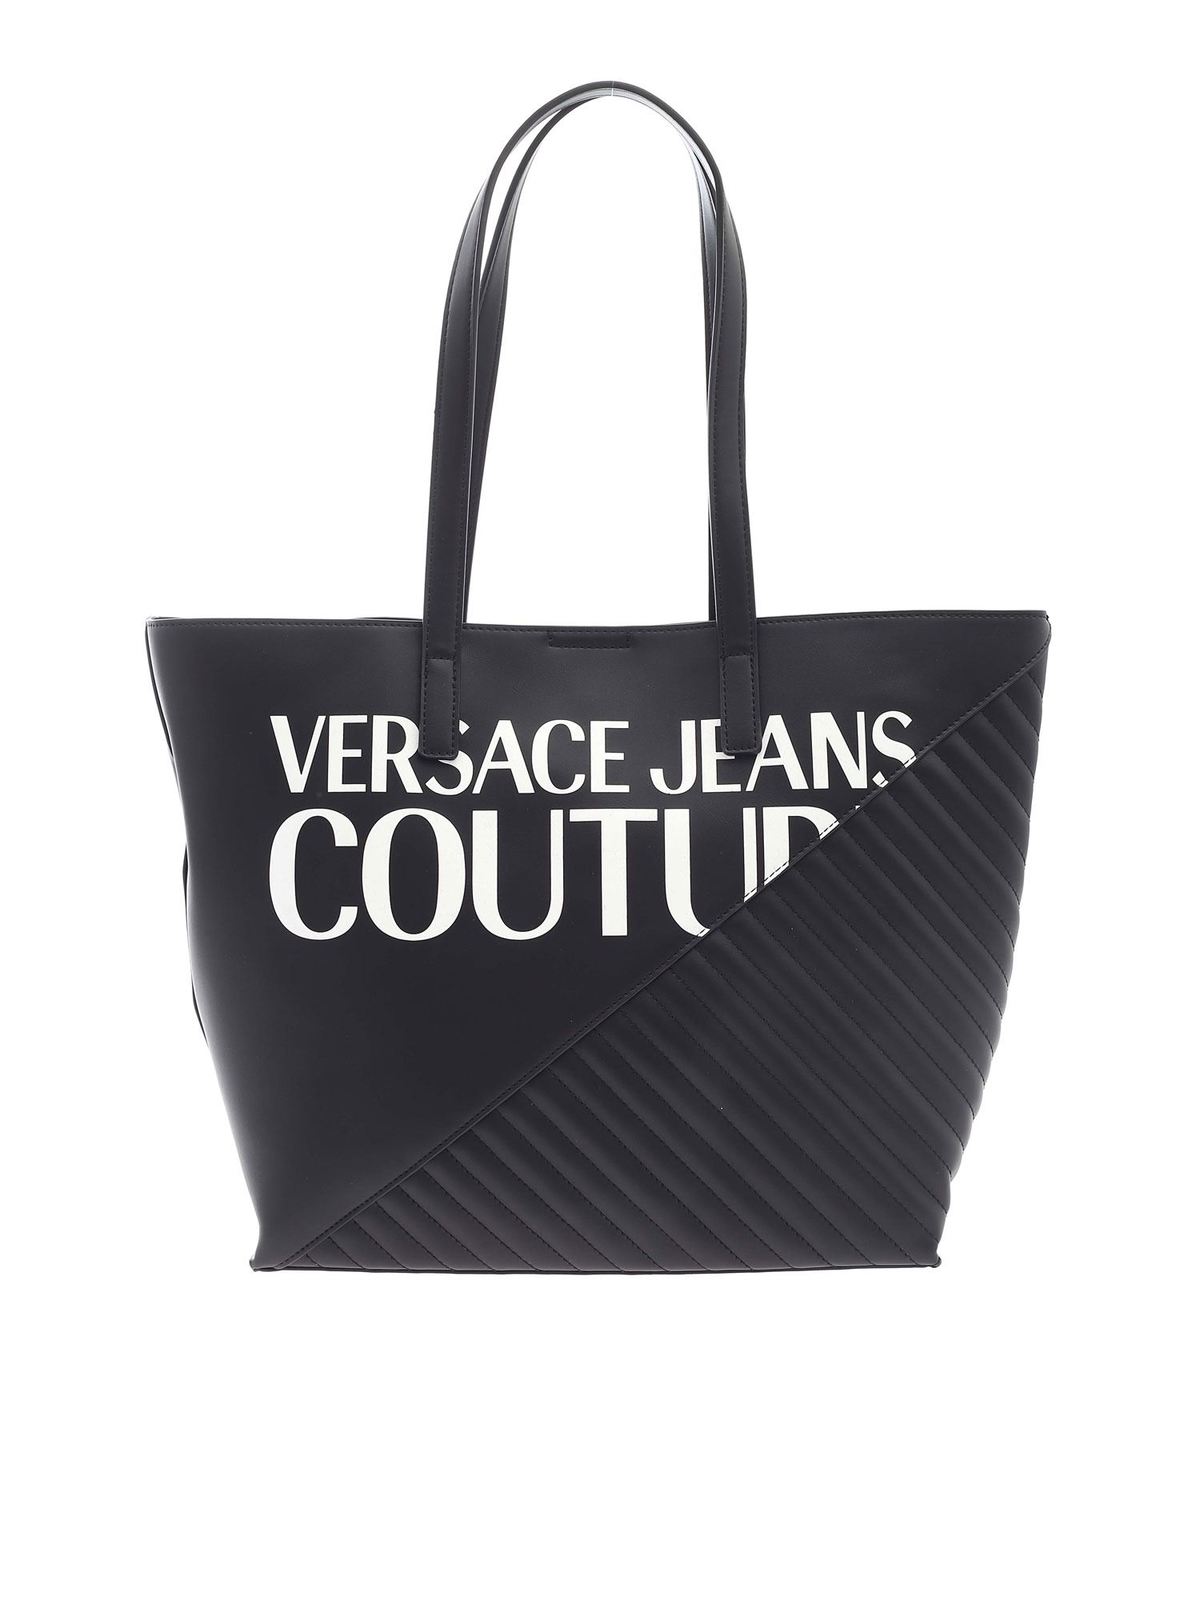 versace jeans shopping bag